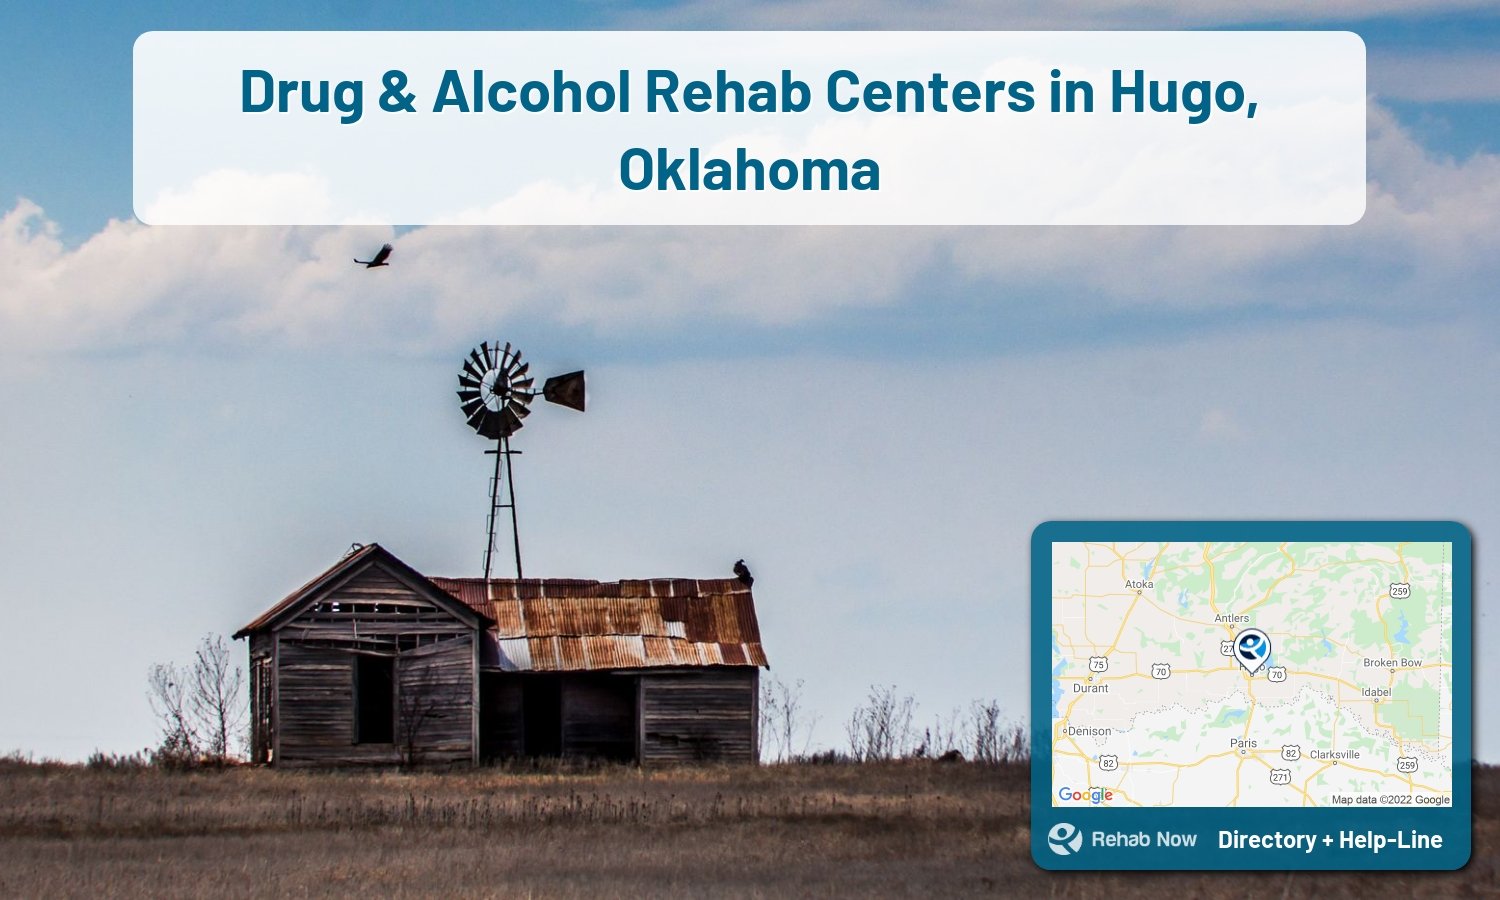 View options, availability, treatment methods, and more, for drug rehab and alcohol treatment in Hugo, Oklahoma